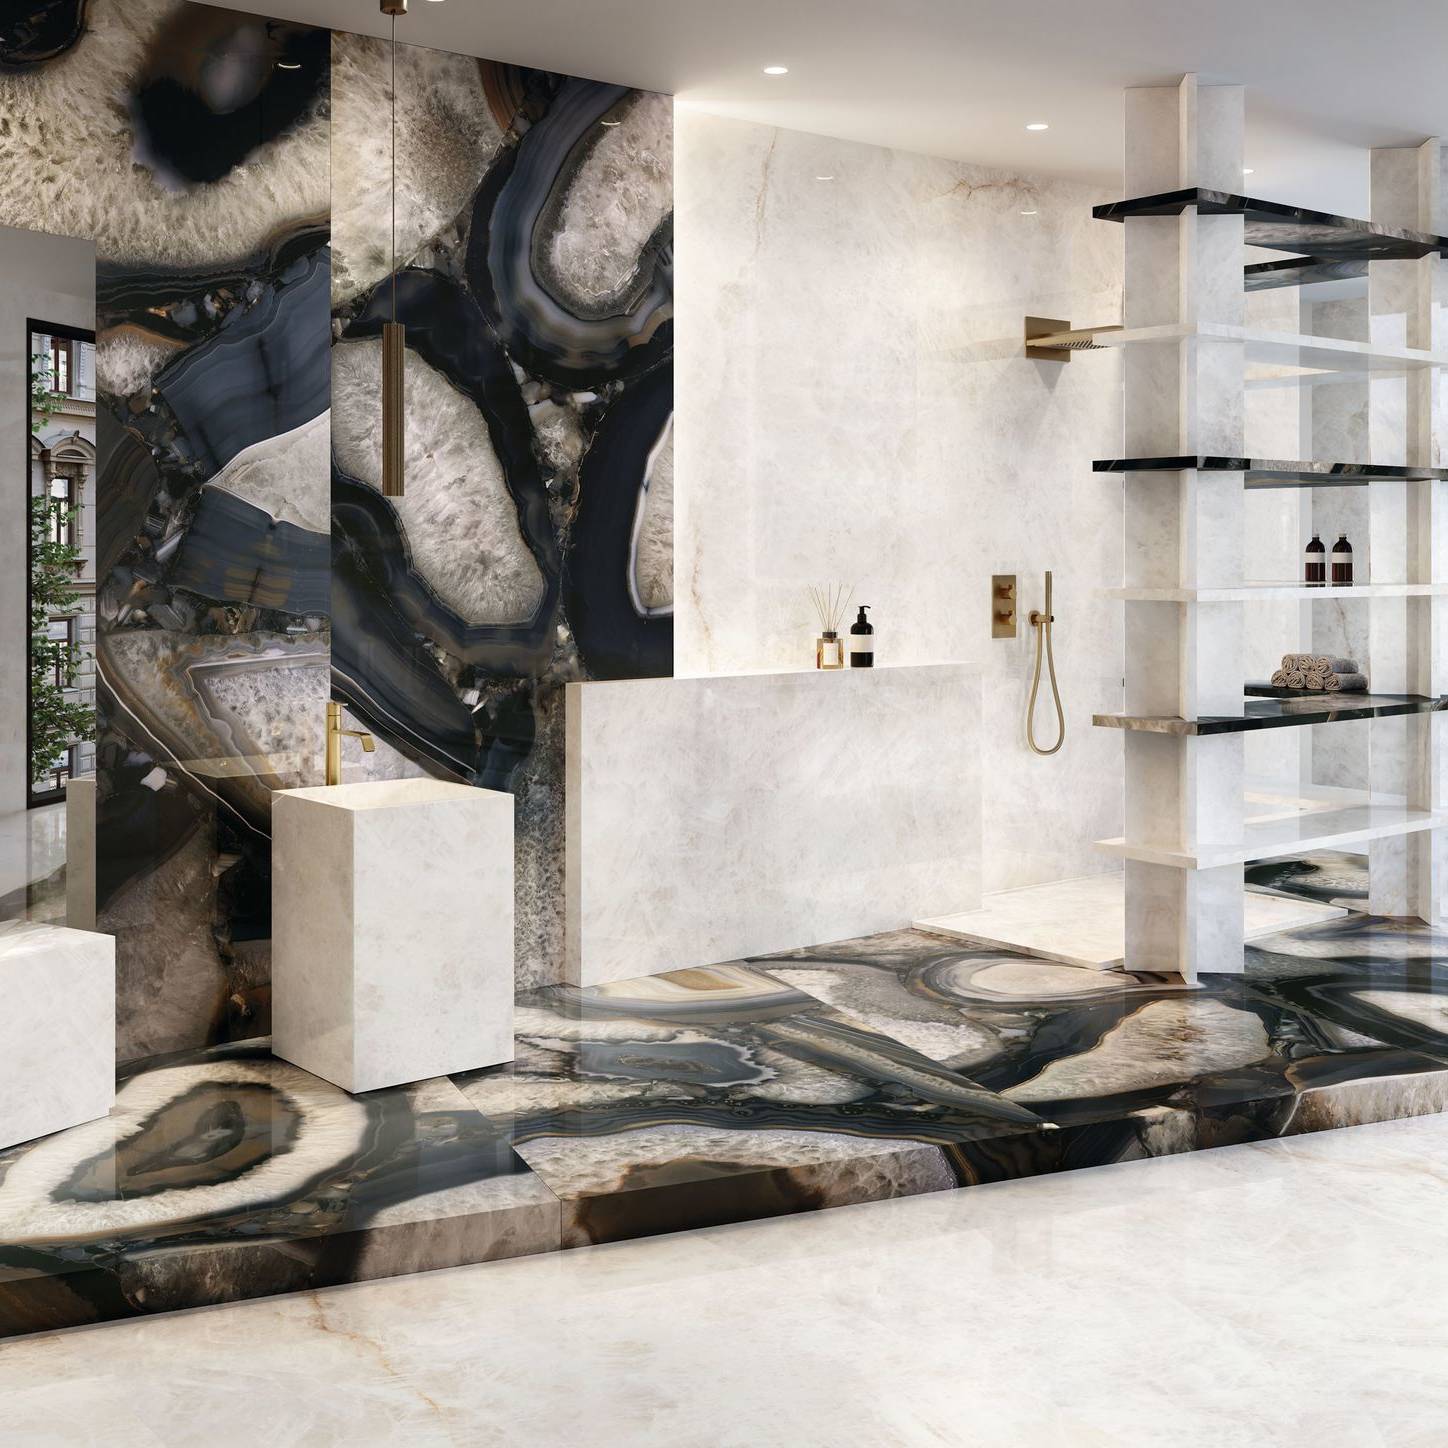 Precious 20 | Stones And More | Finest selection of Mosaics, Glass, Tile and Stone